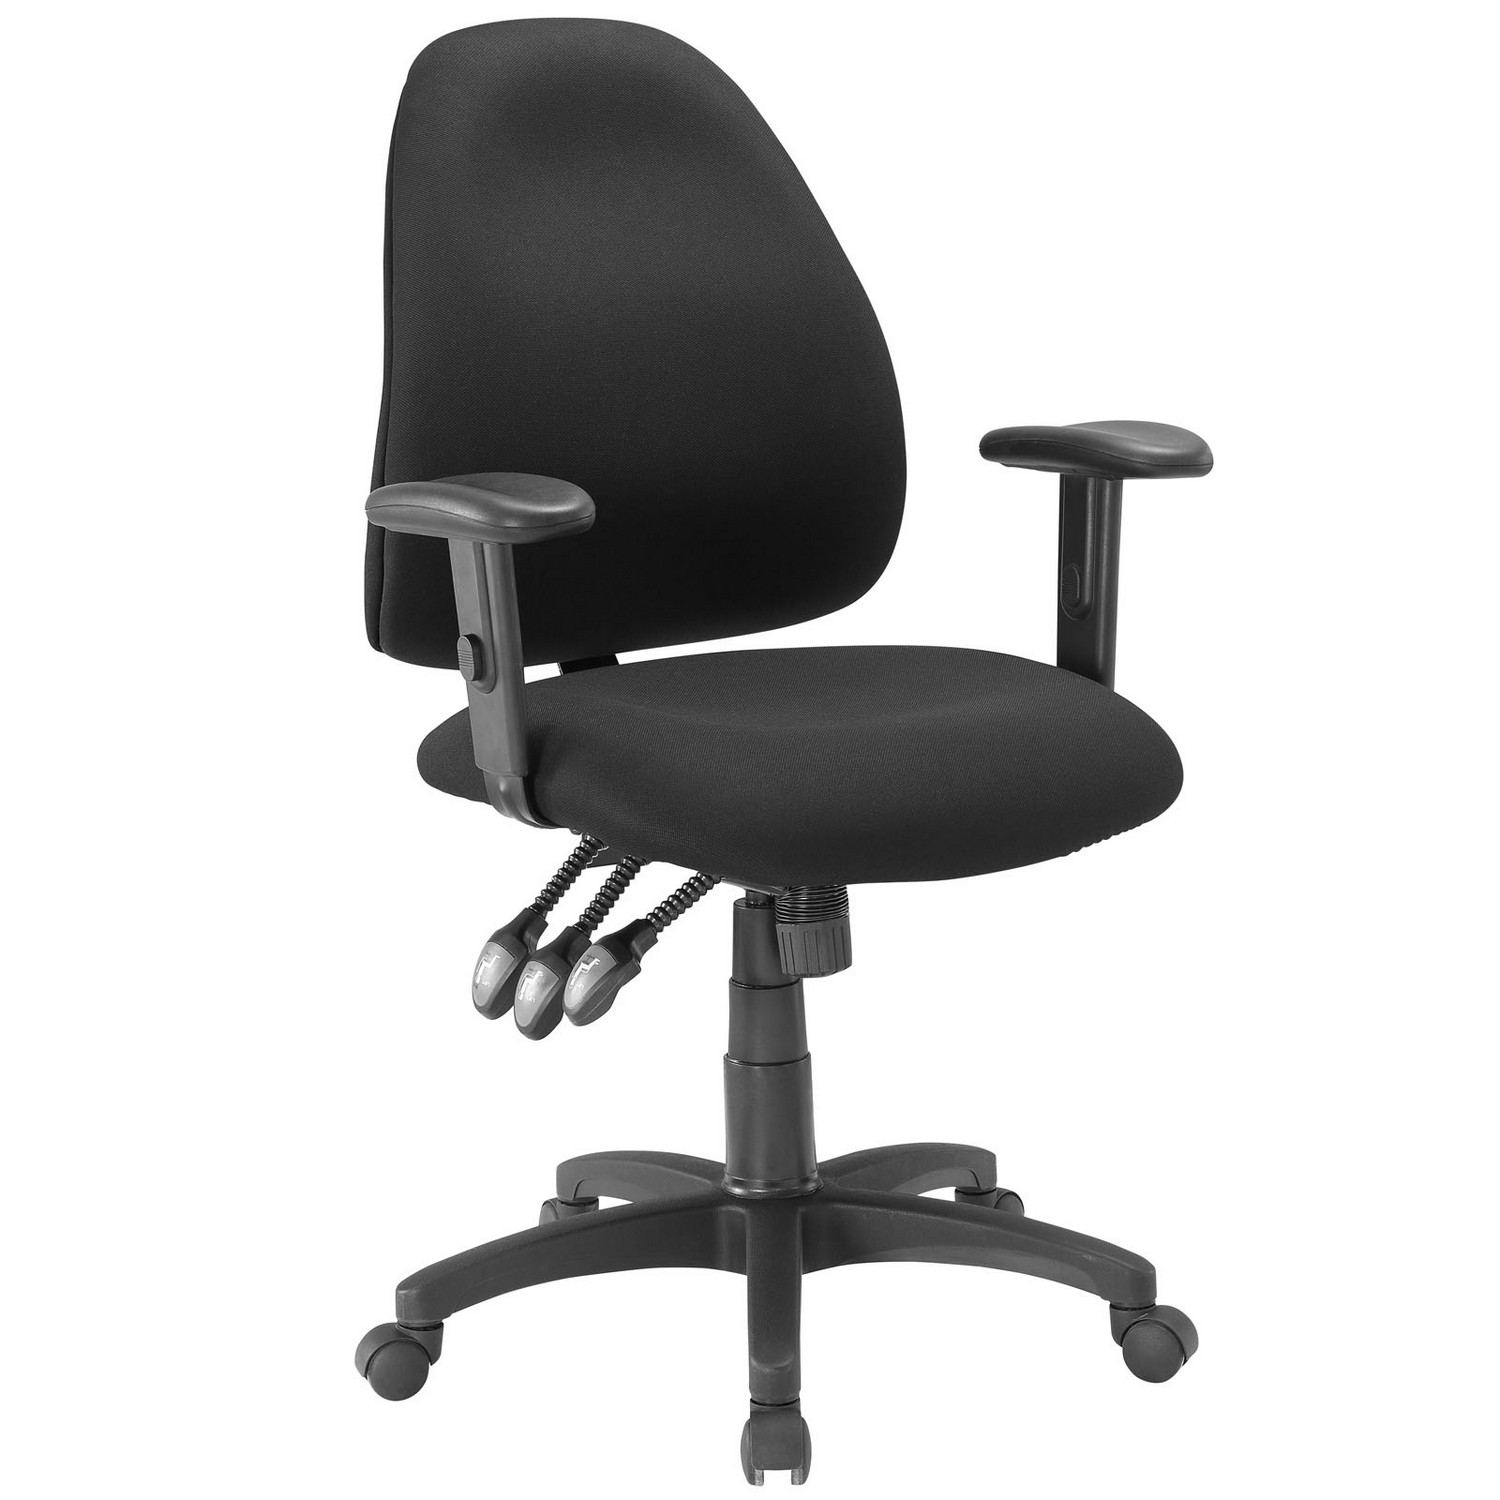 Modway Lax Office Chair - Black